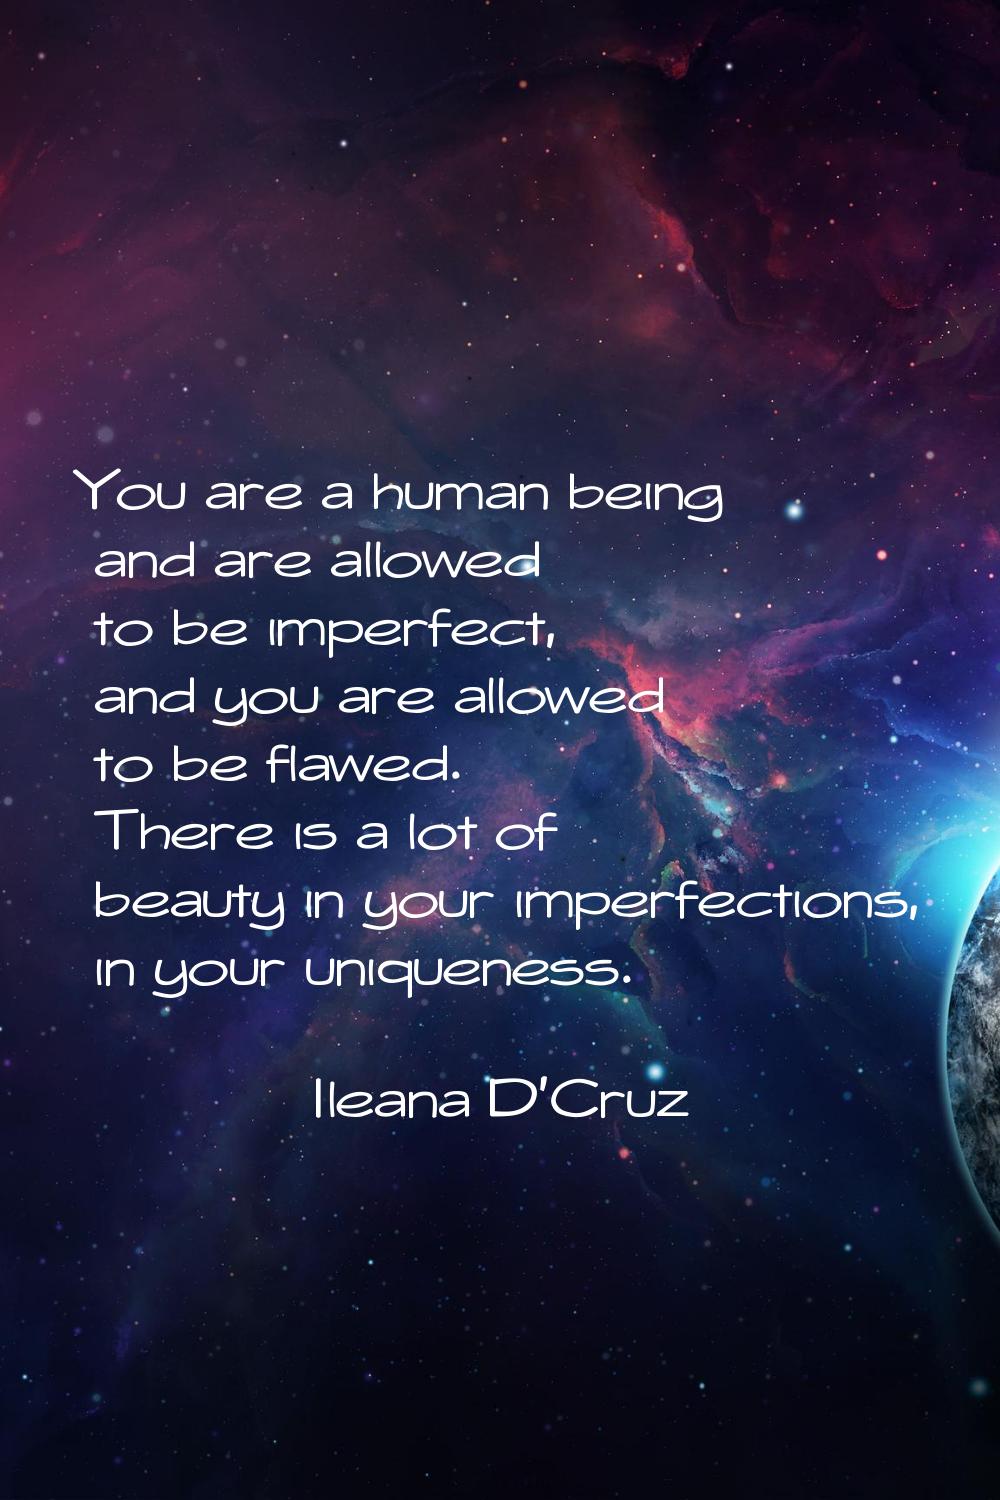 You are a human being and are allowed to be imperfect, and you are allowed to be flawed. There is a